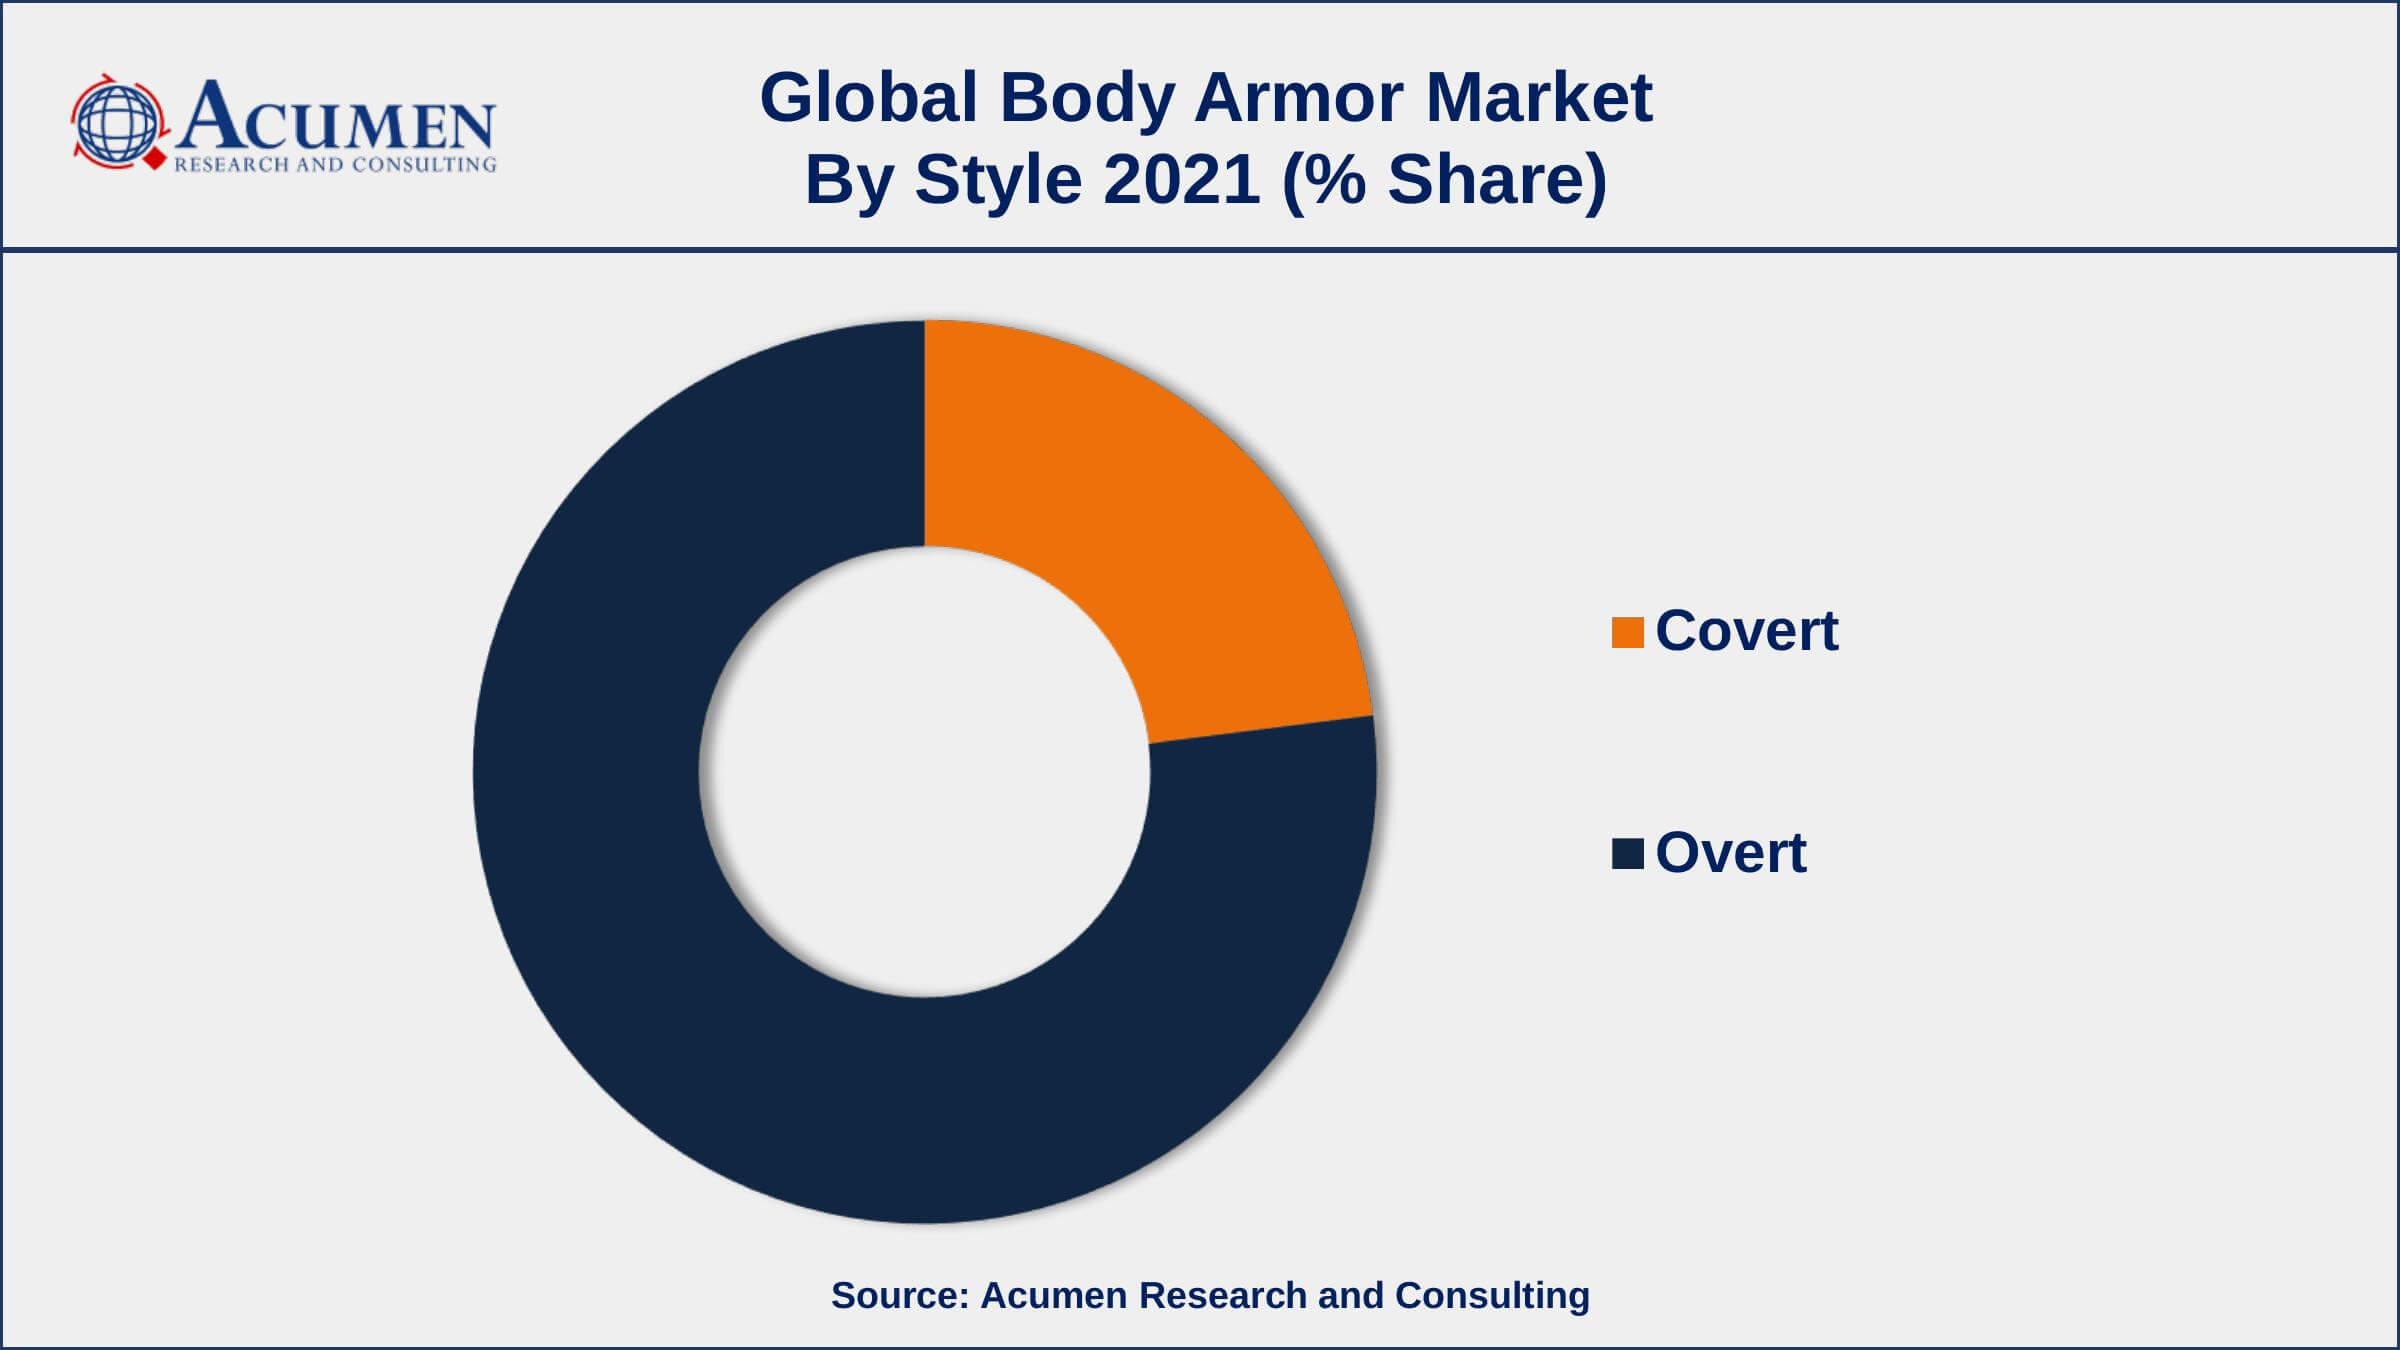 Increased incidence of terrorist incidents in public areas, drives the body armor market share